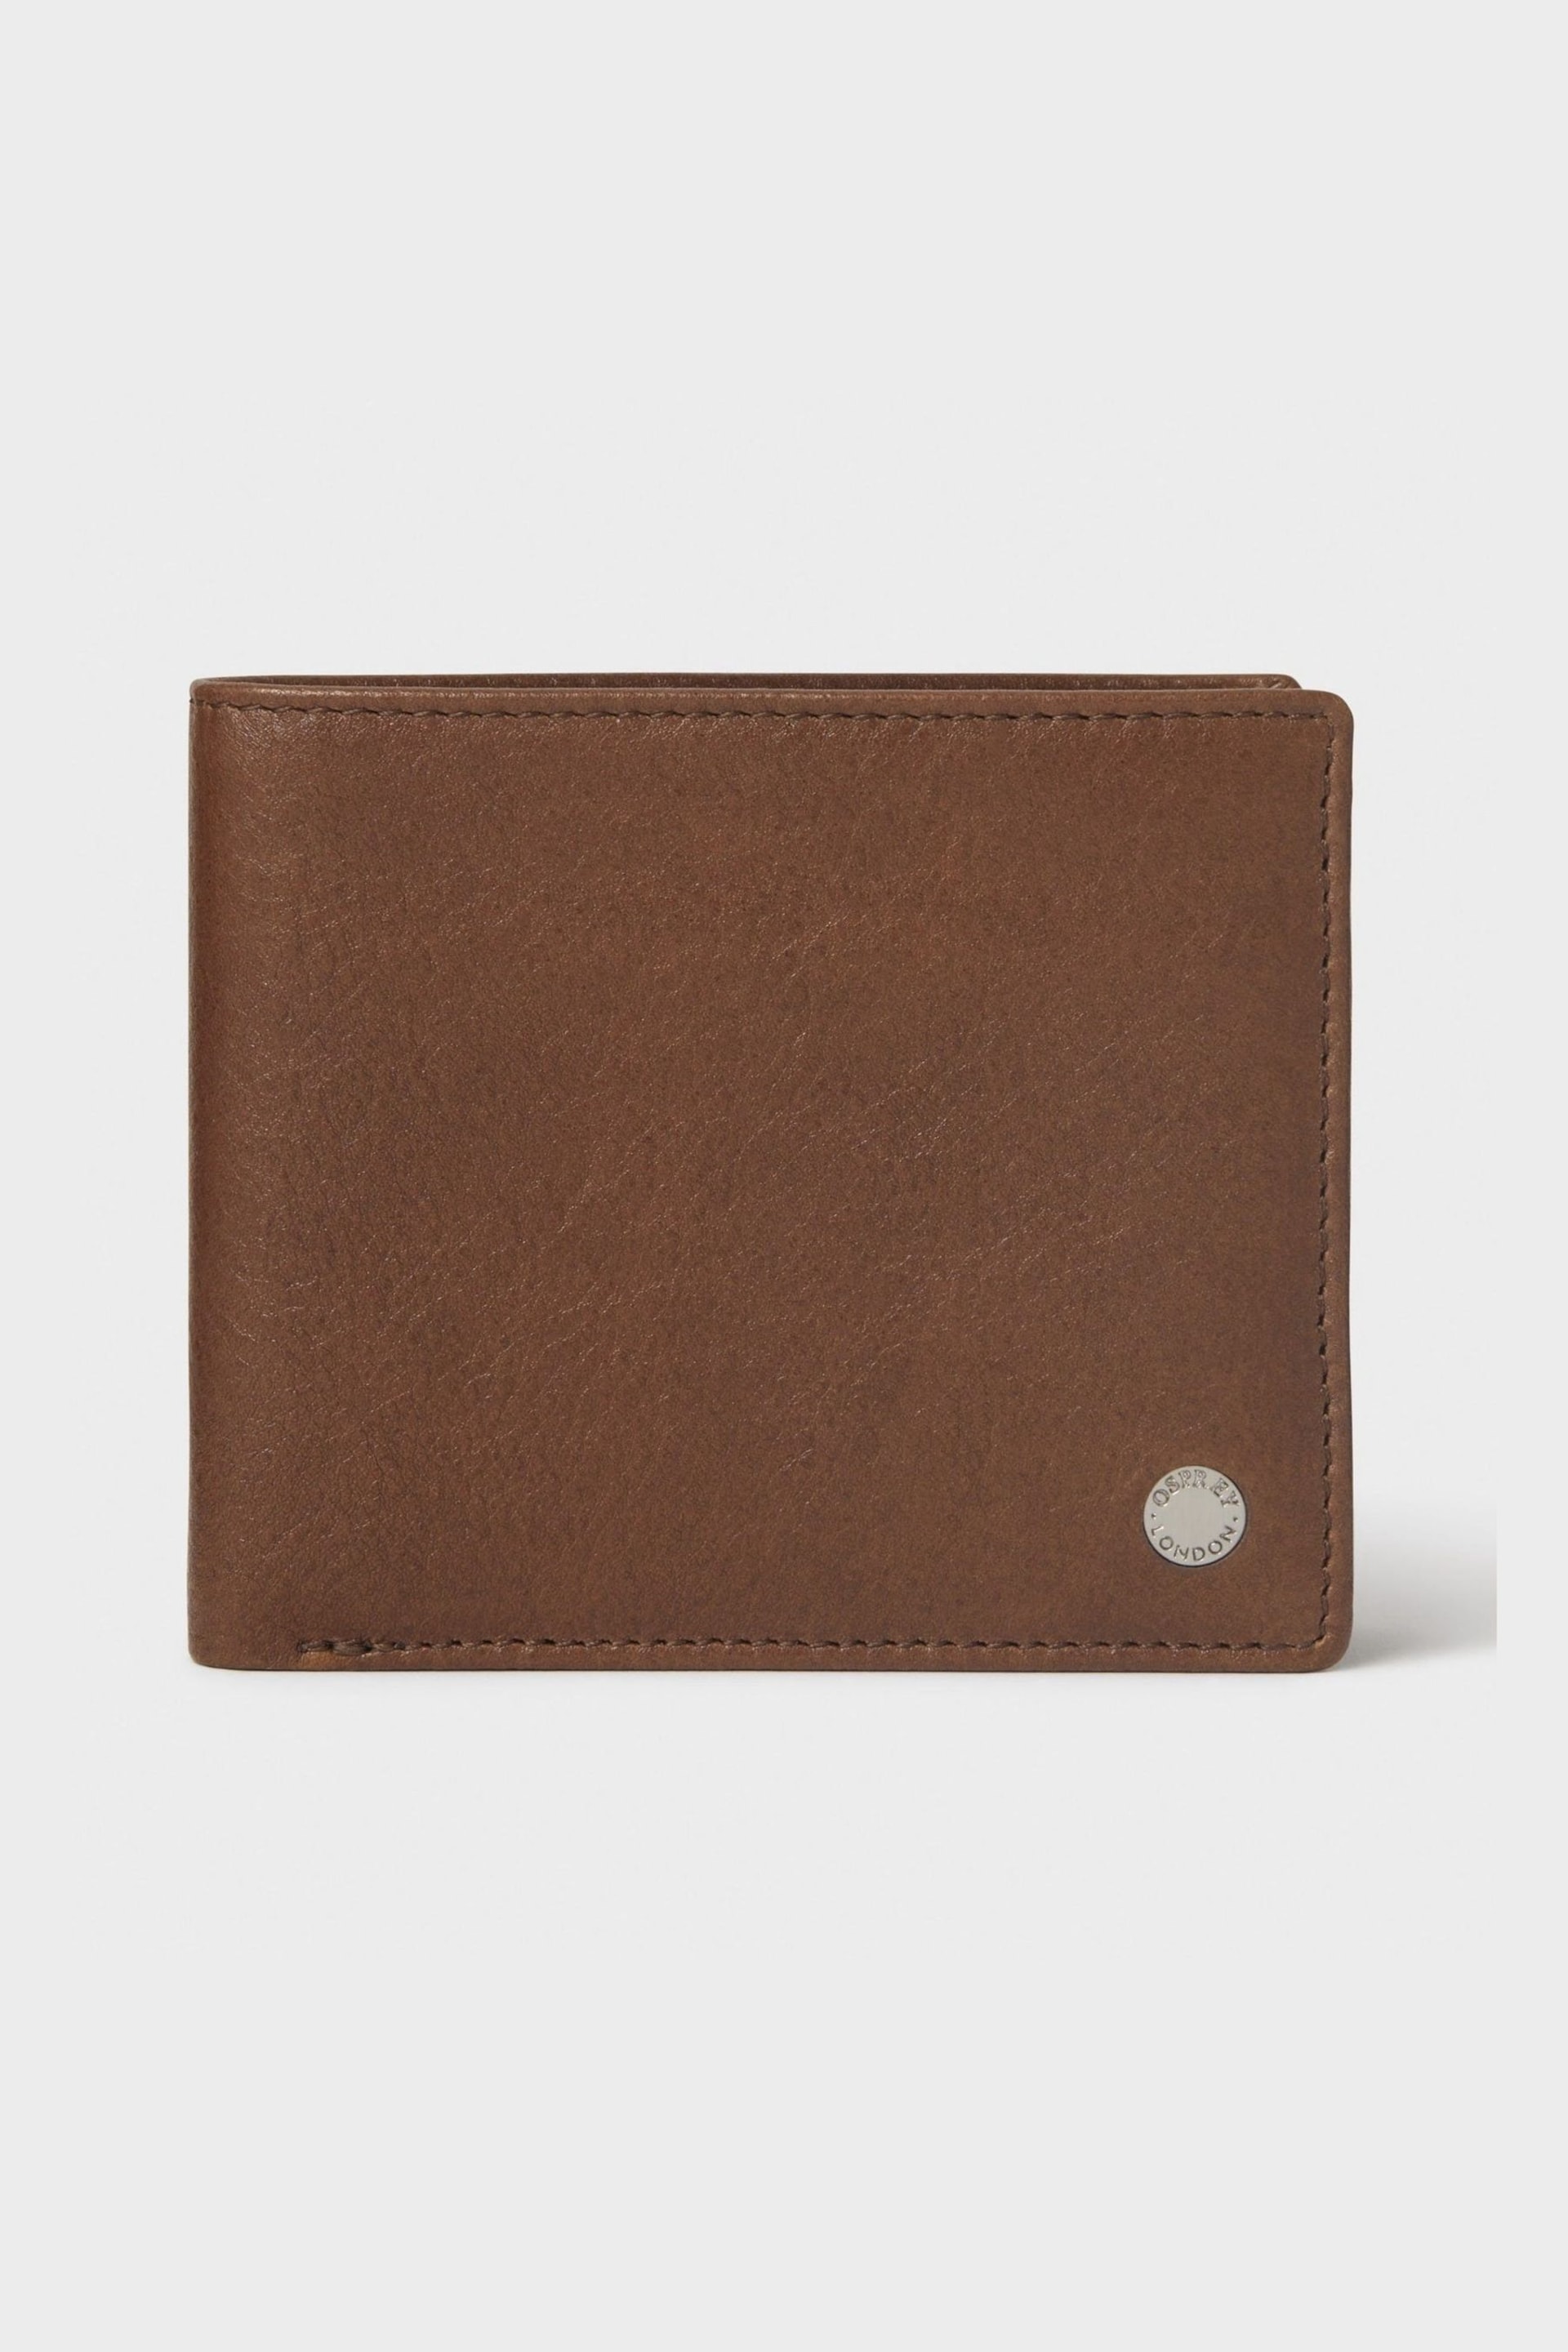 Osprey London Large Business Class E/W Coin Wallet - Image 2 of 5